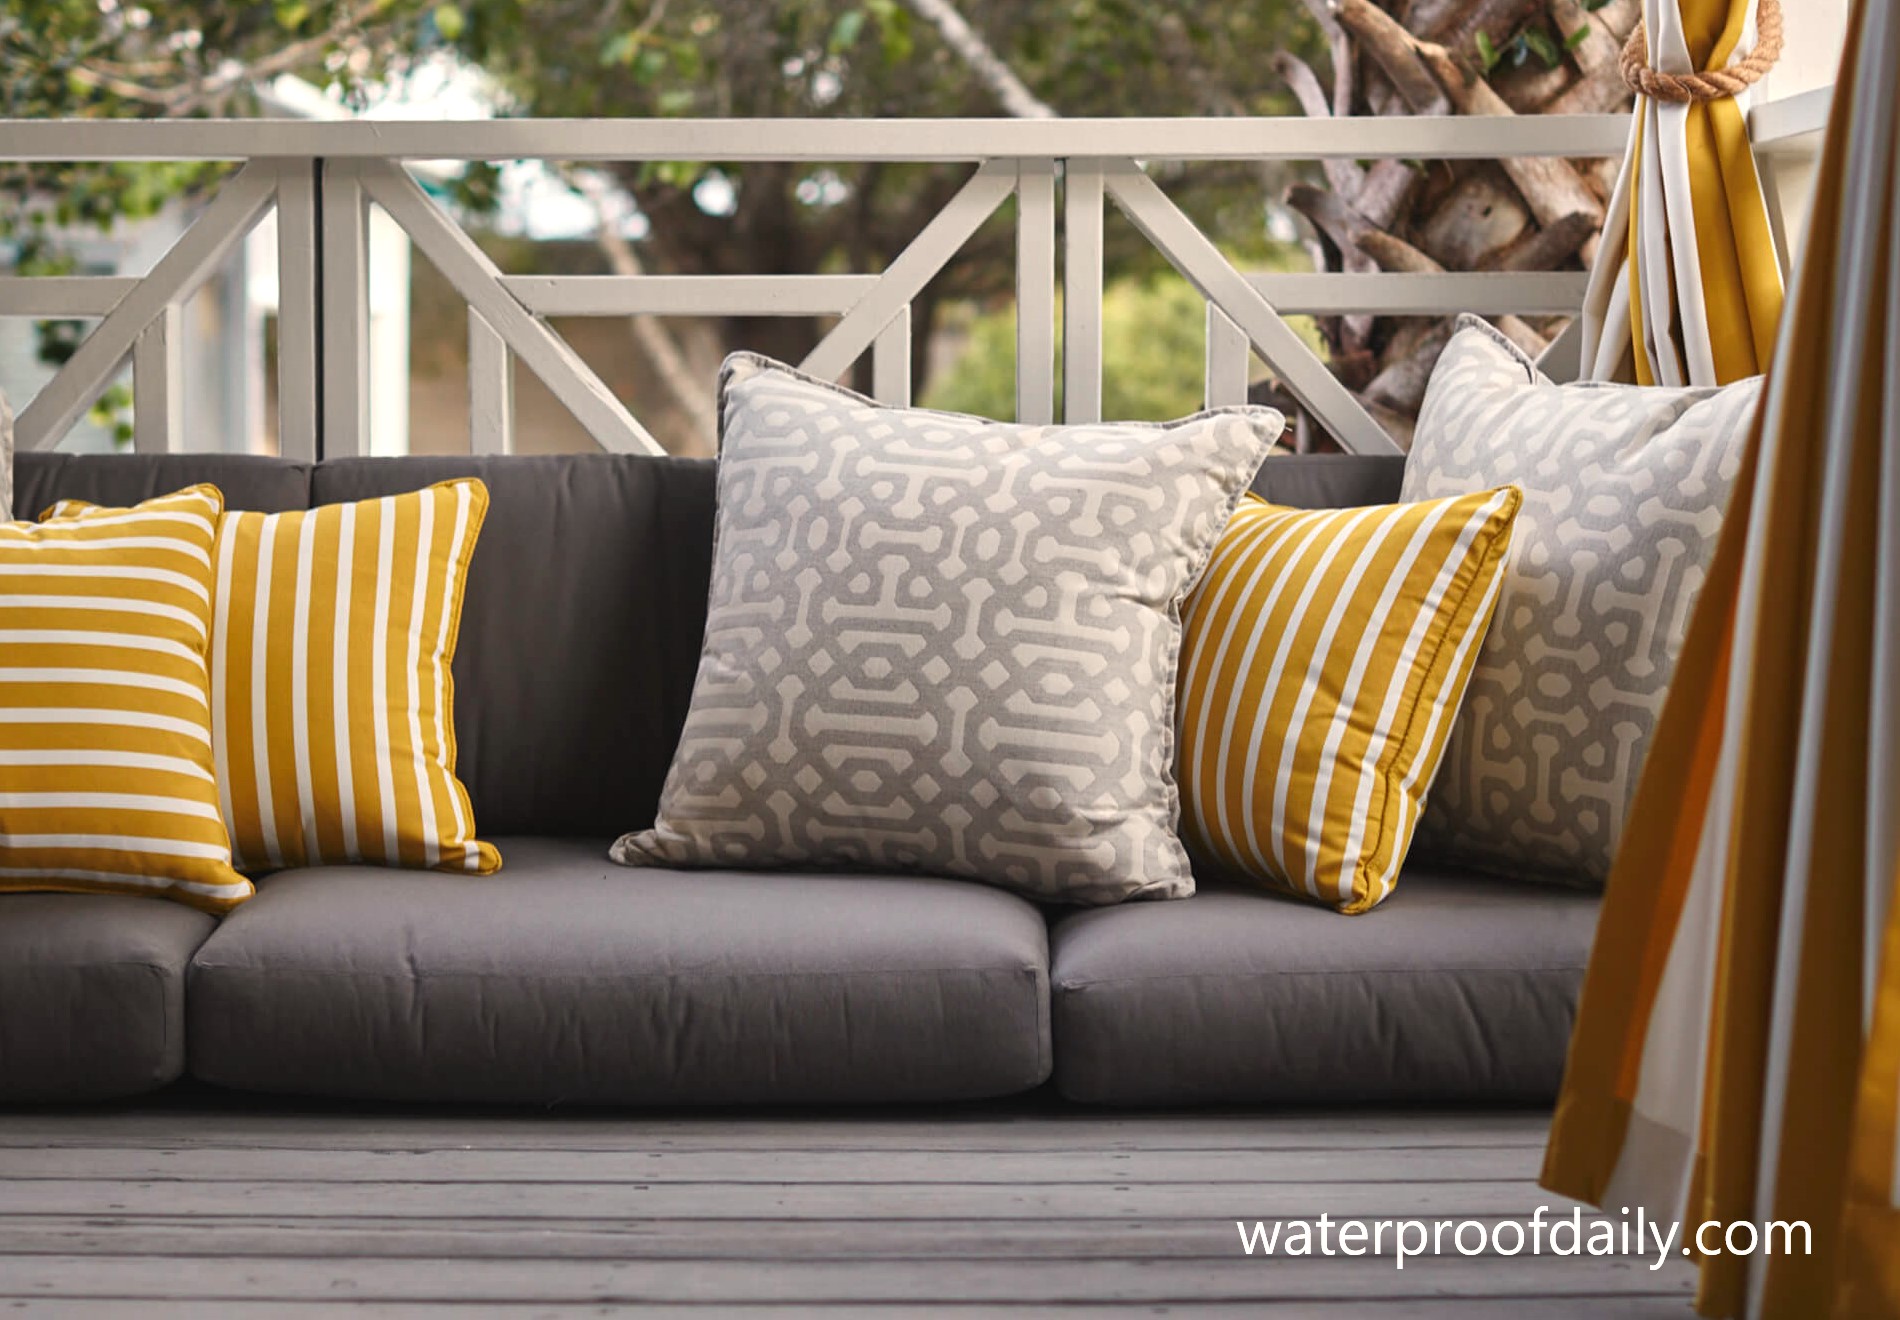 The 15 Best Fabric For Outdoor Furniture Reviews And Guide 2021